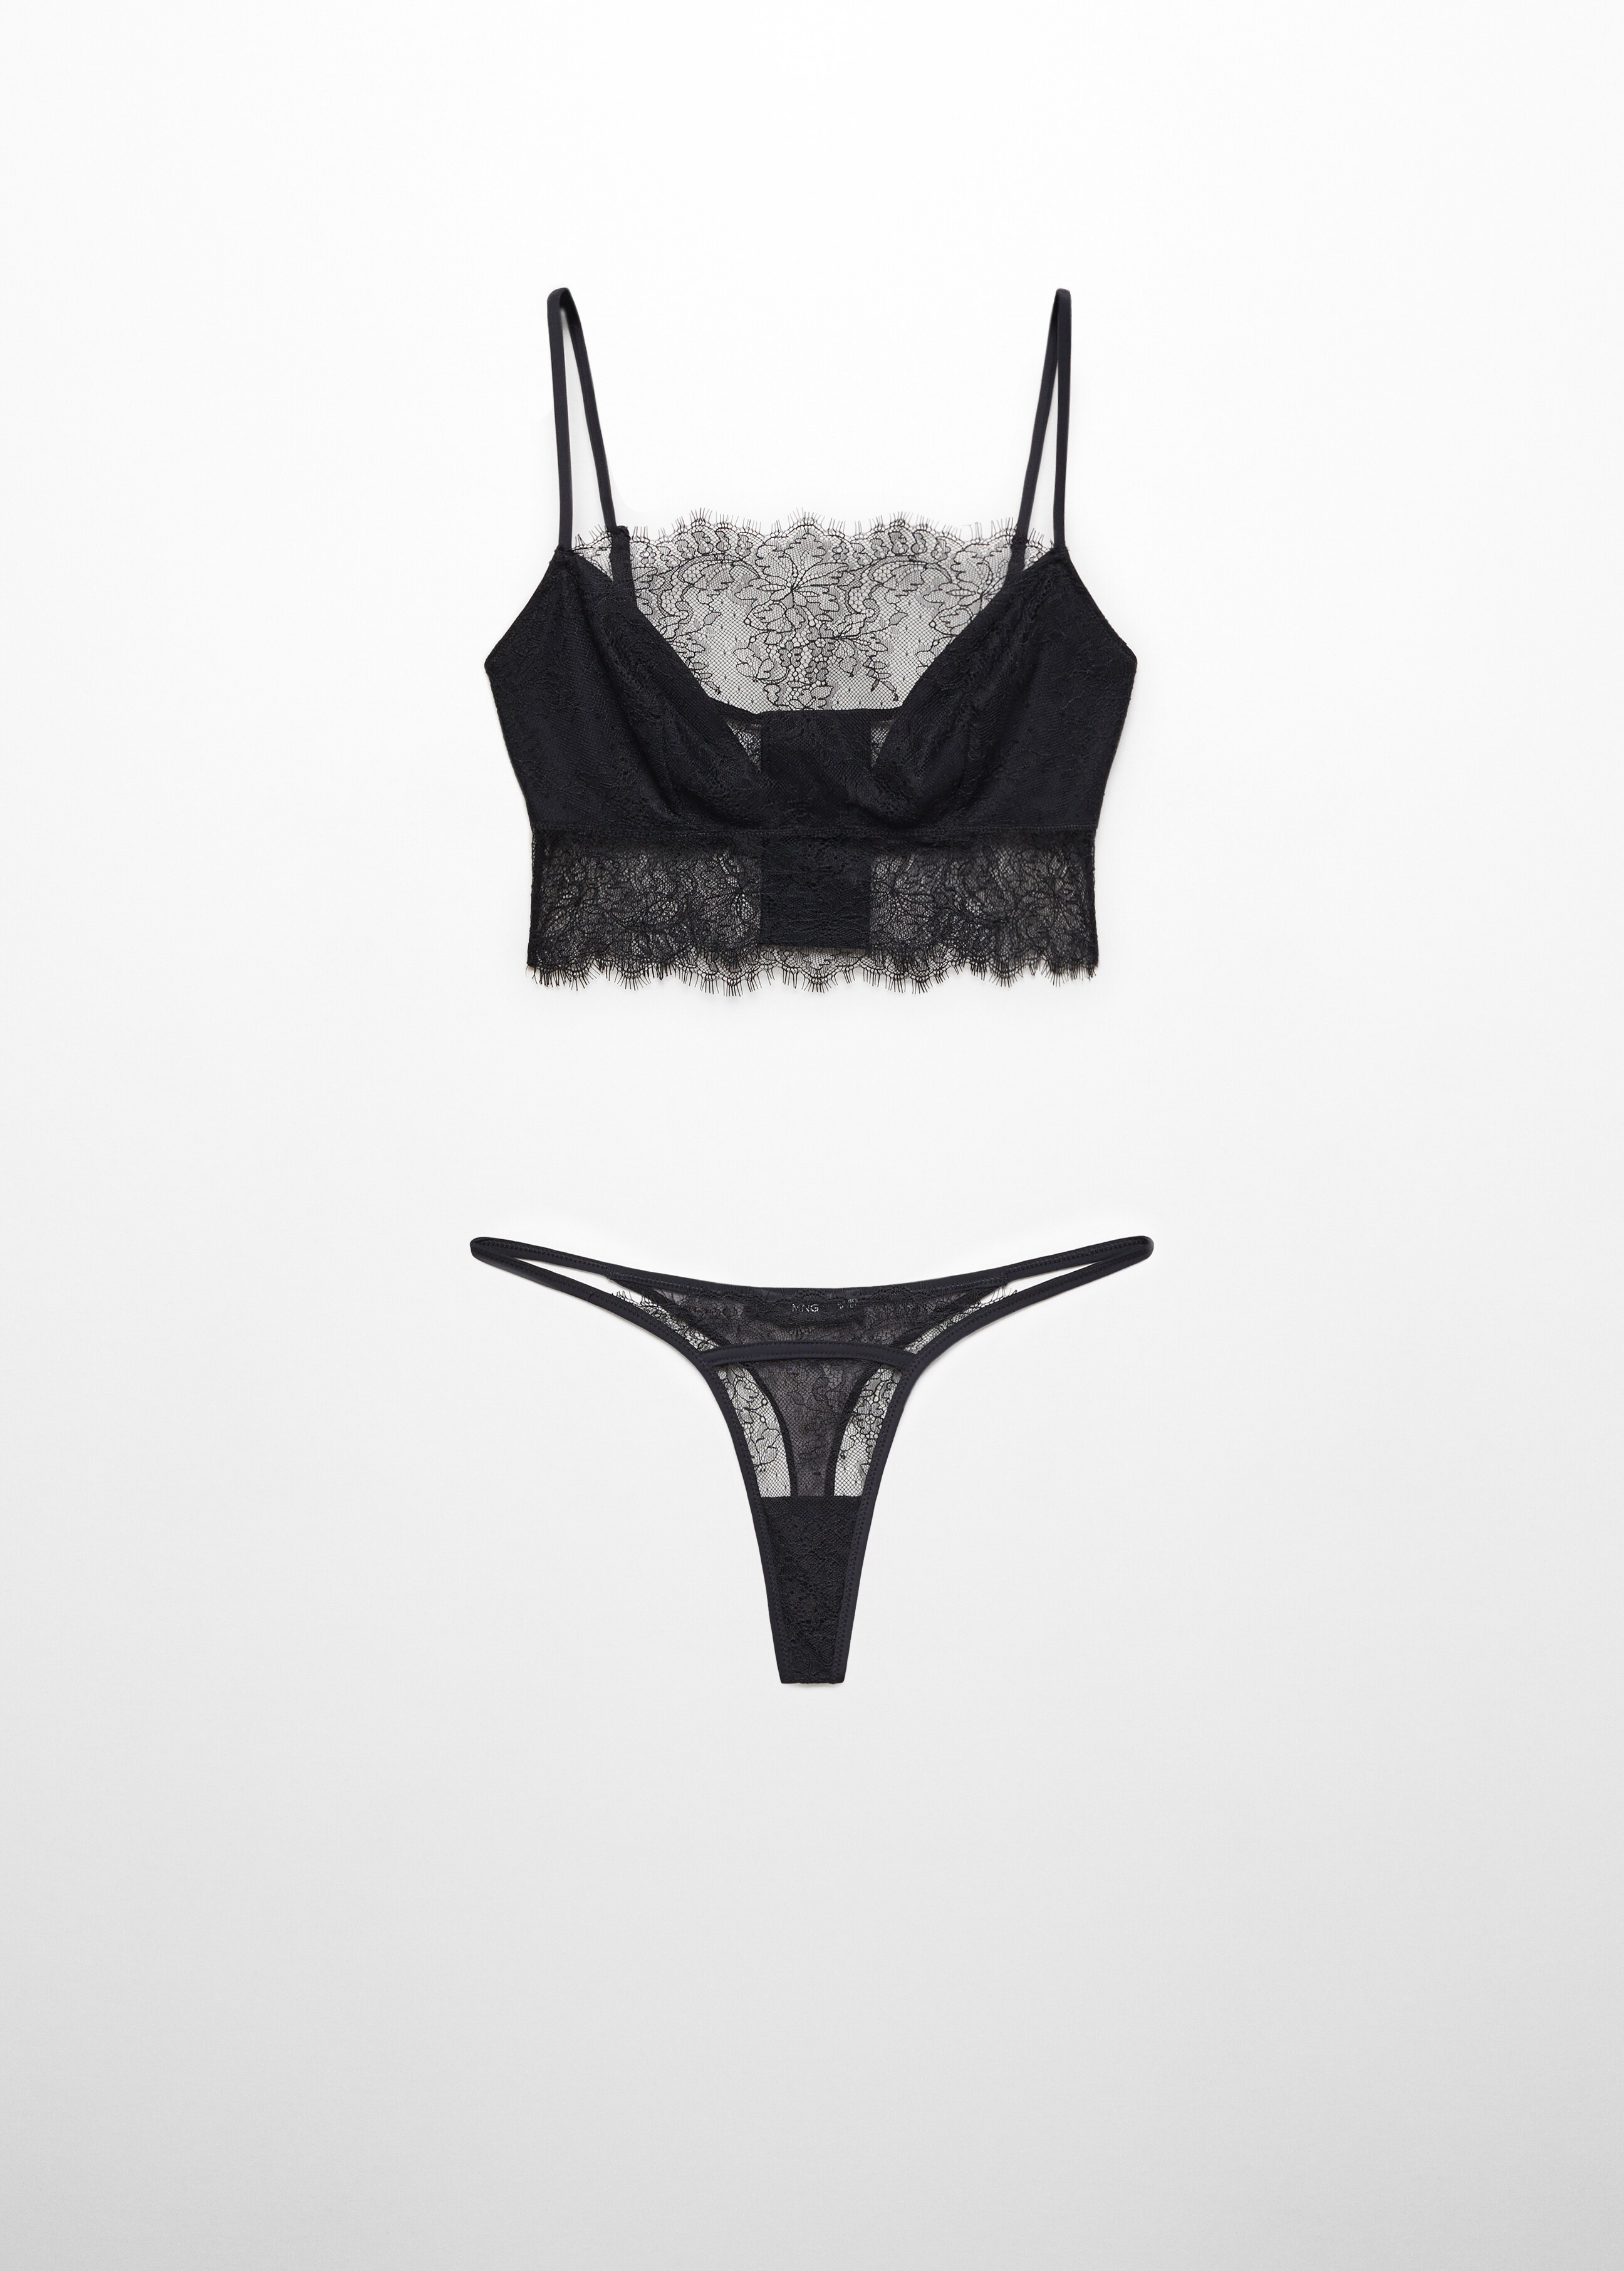 Lace bralette - Details of the article 7